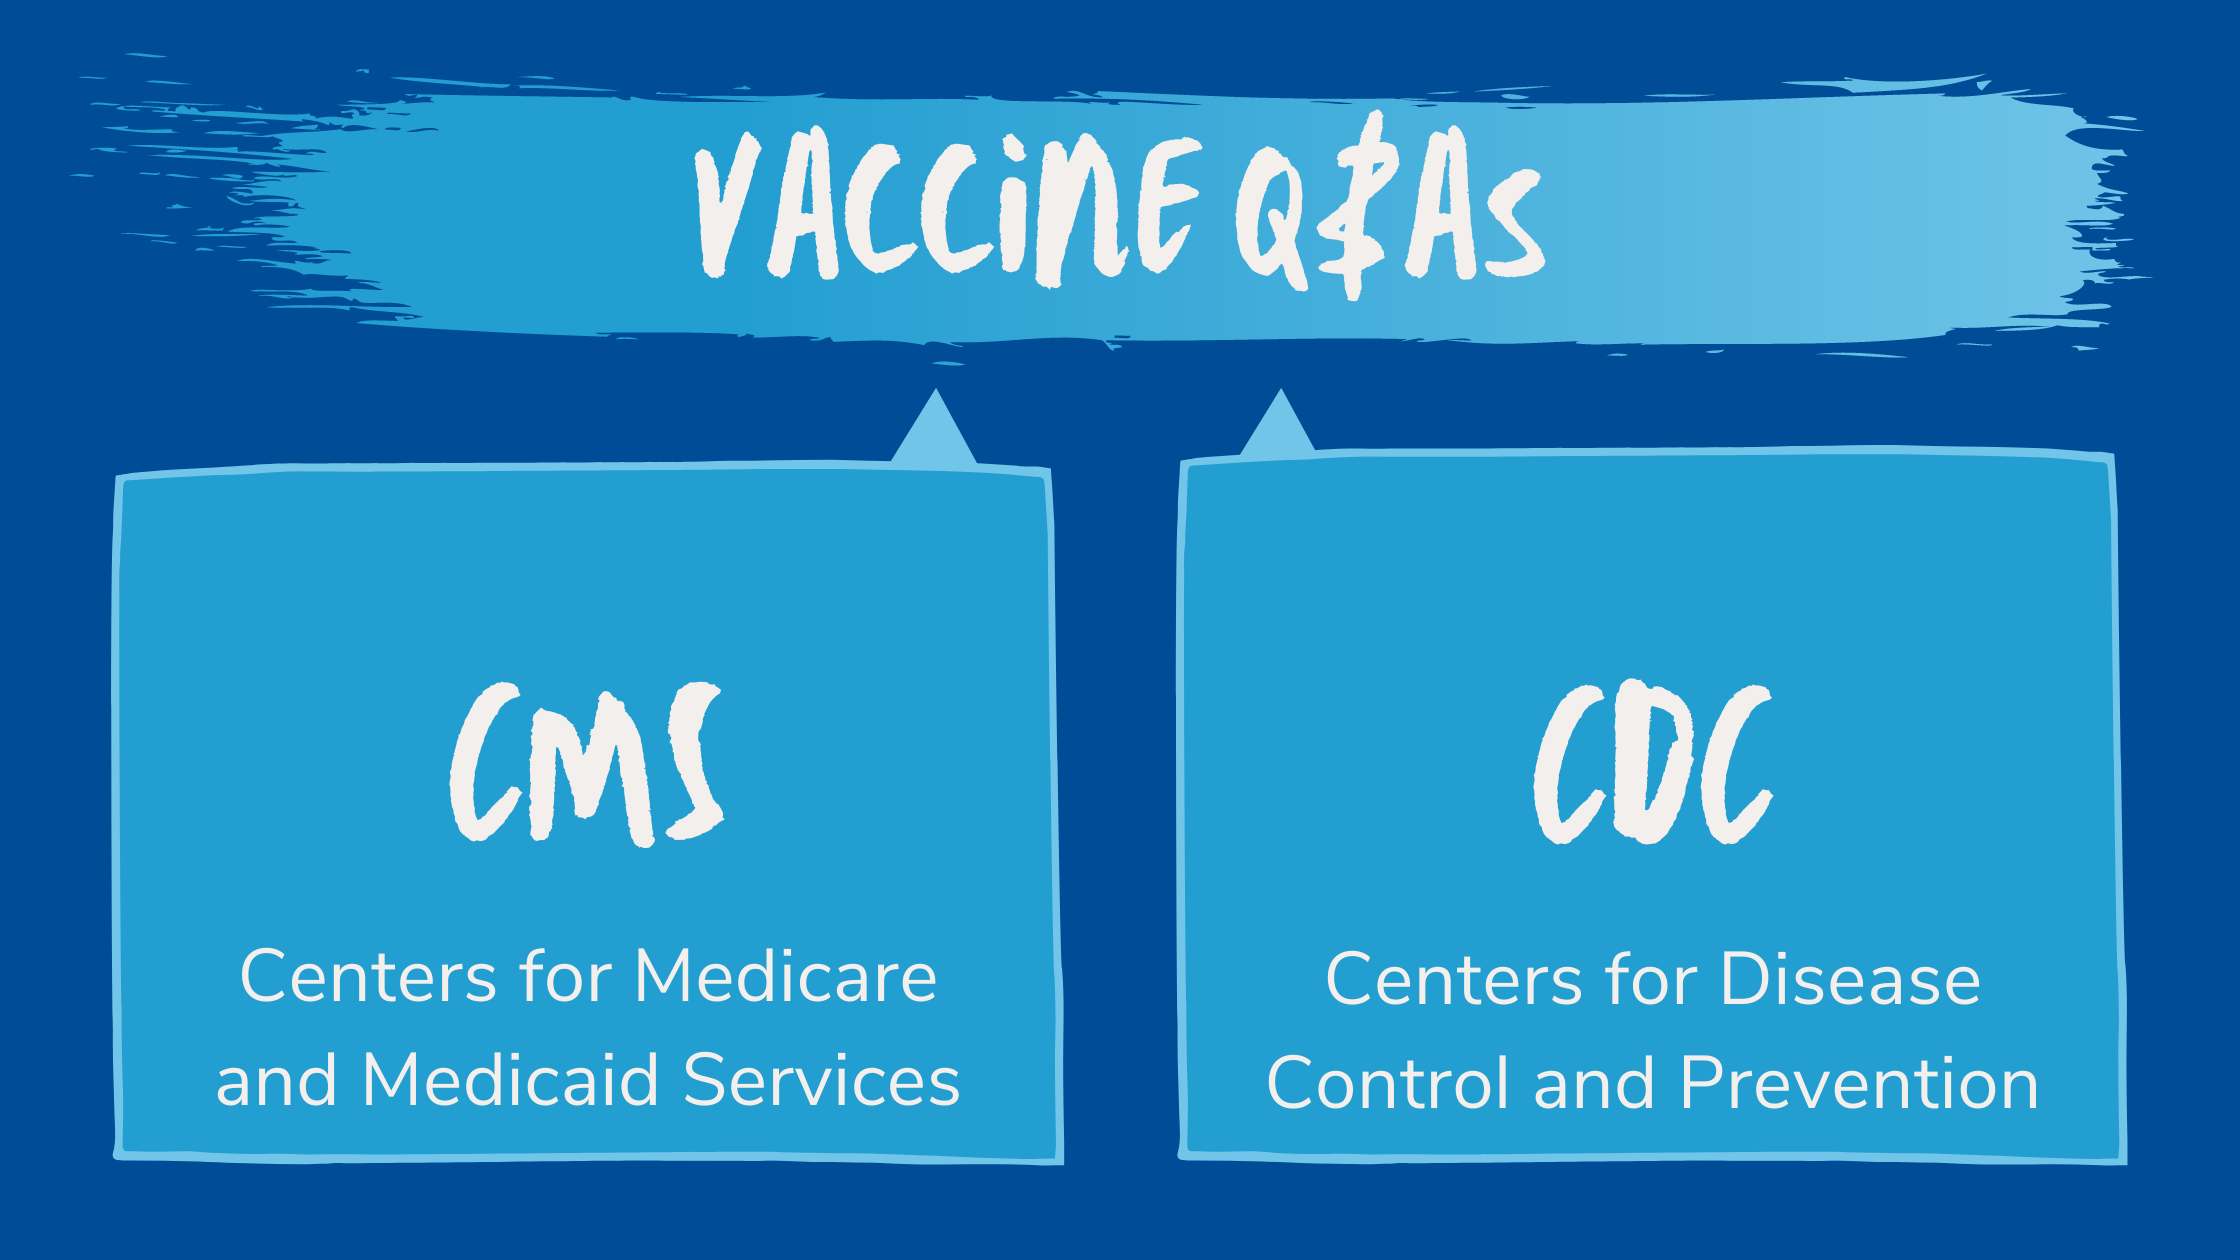 COVID-19 Vaccine Q&A from CMS and CDC